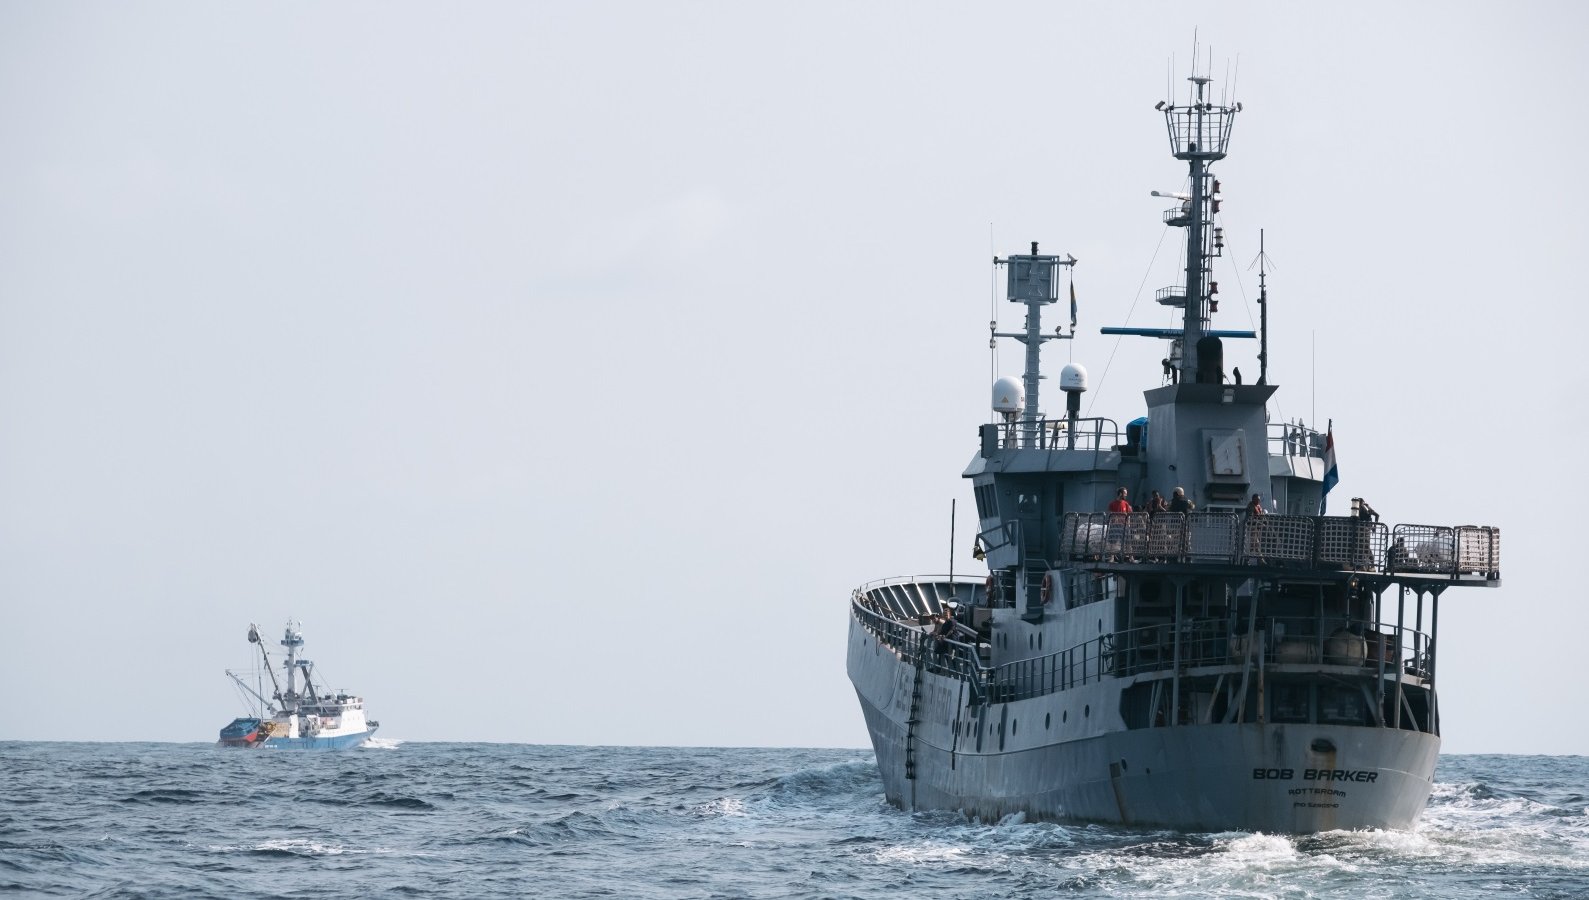 Three Illegal Fishing Vessels Arrested: Sea Shepherd returns to Gabon to help protect Africa’s largest marine protected area